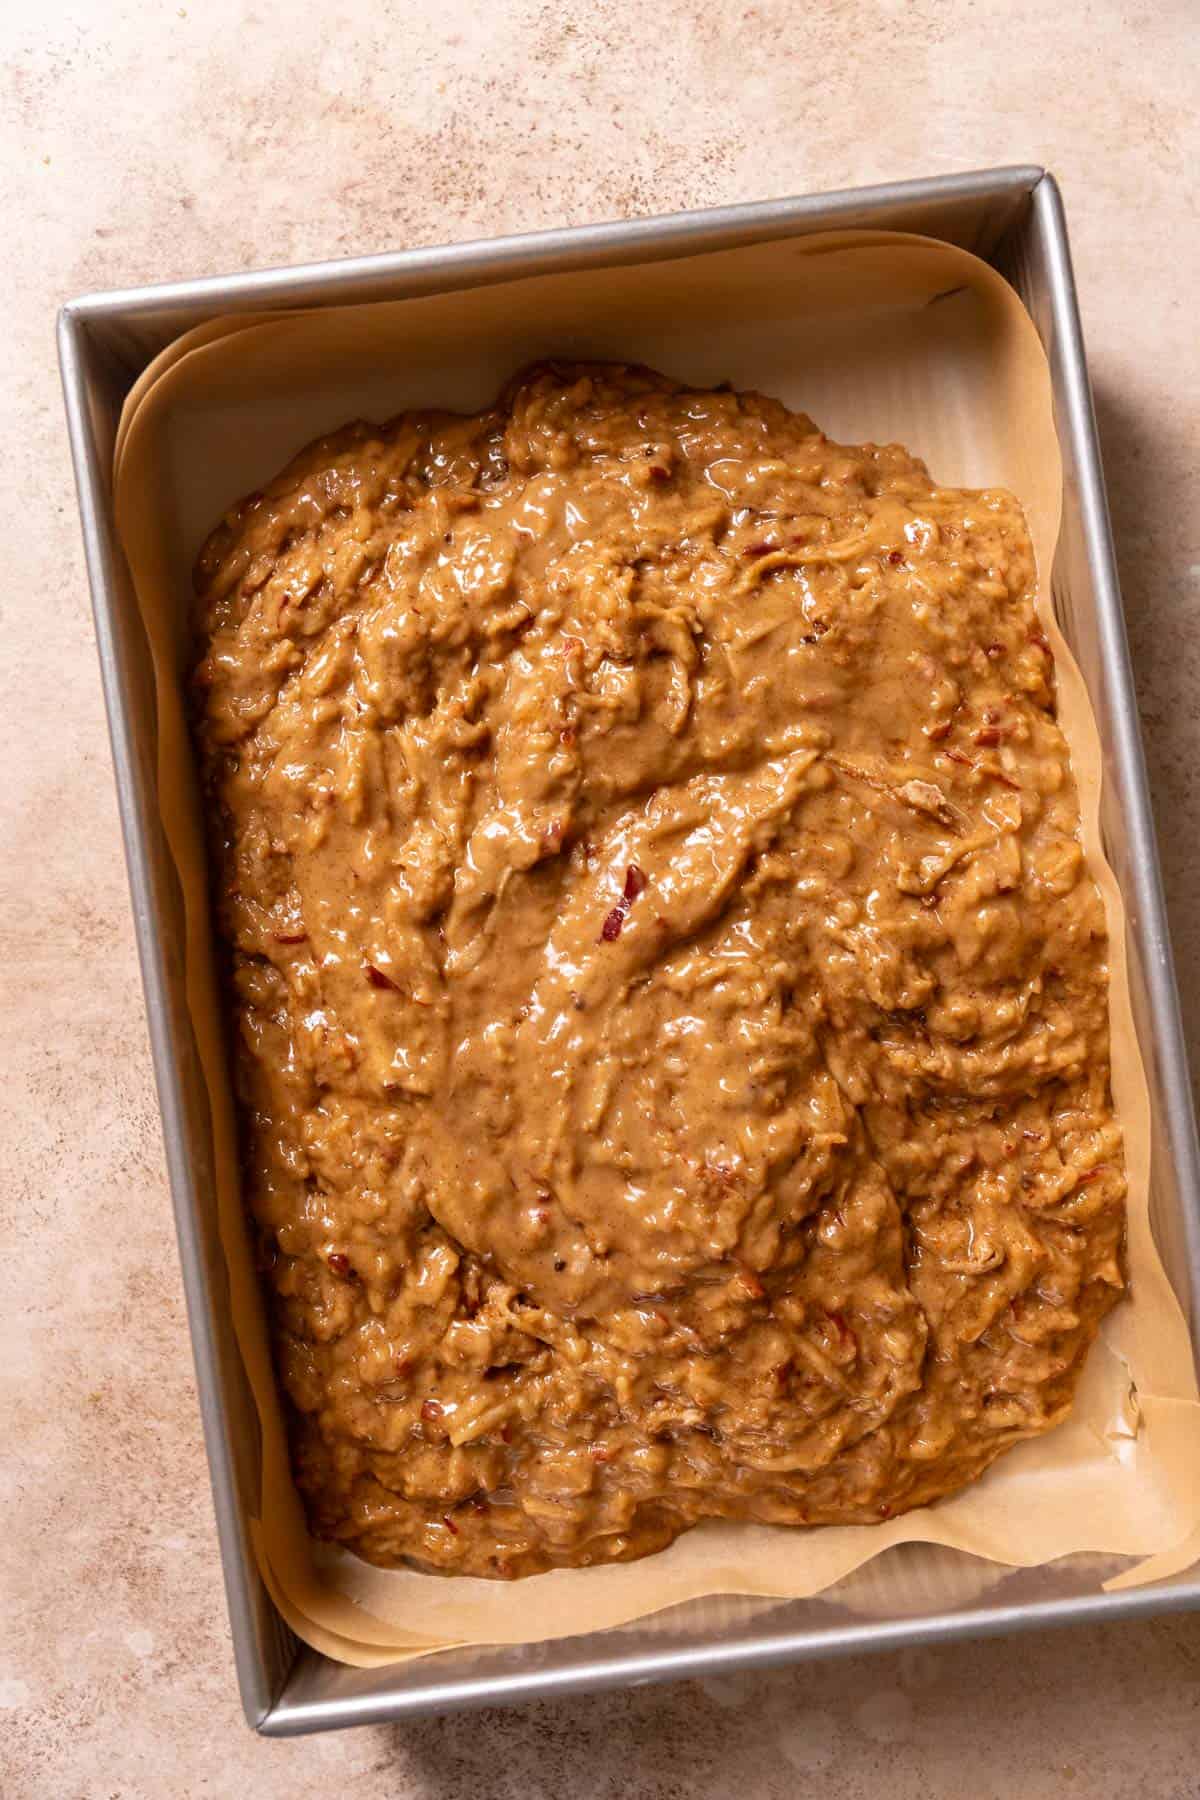 Apple batter spread into a large baking pan.